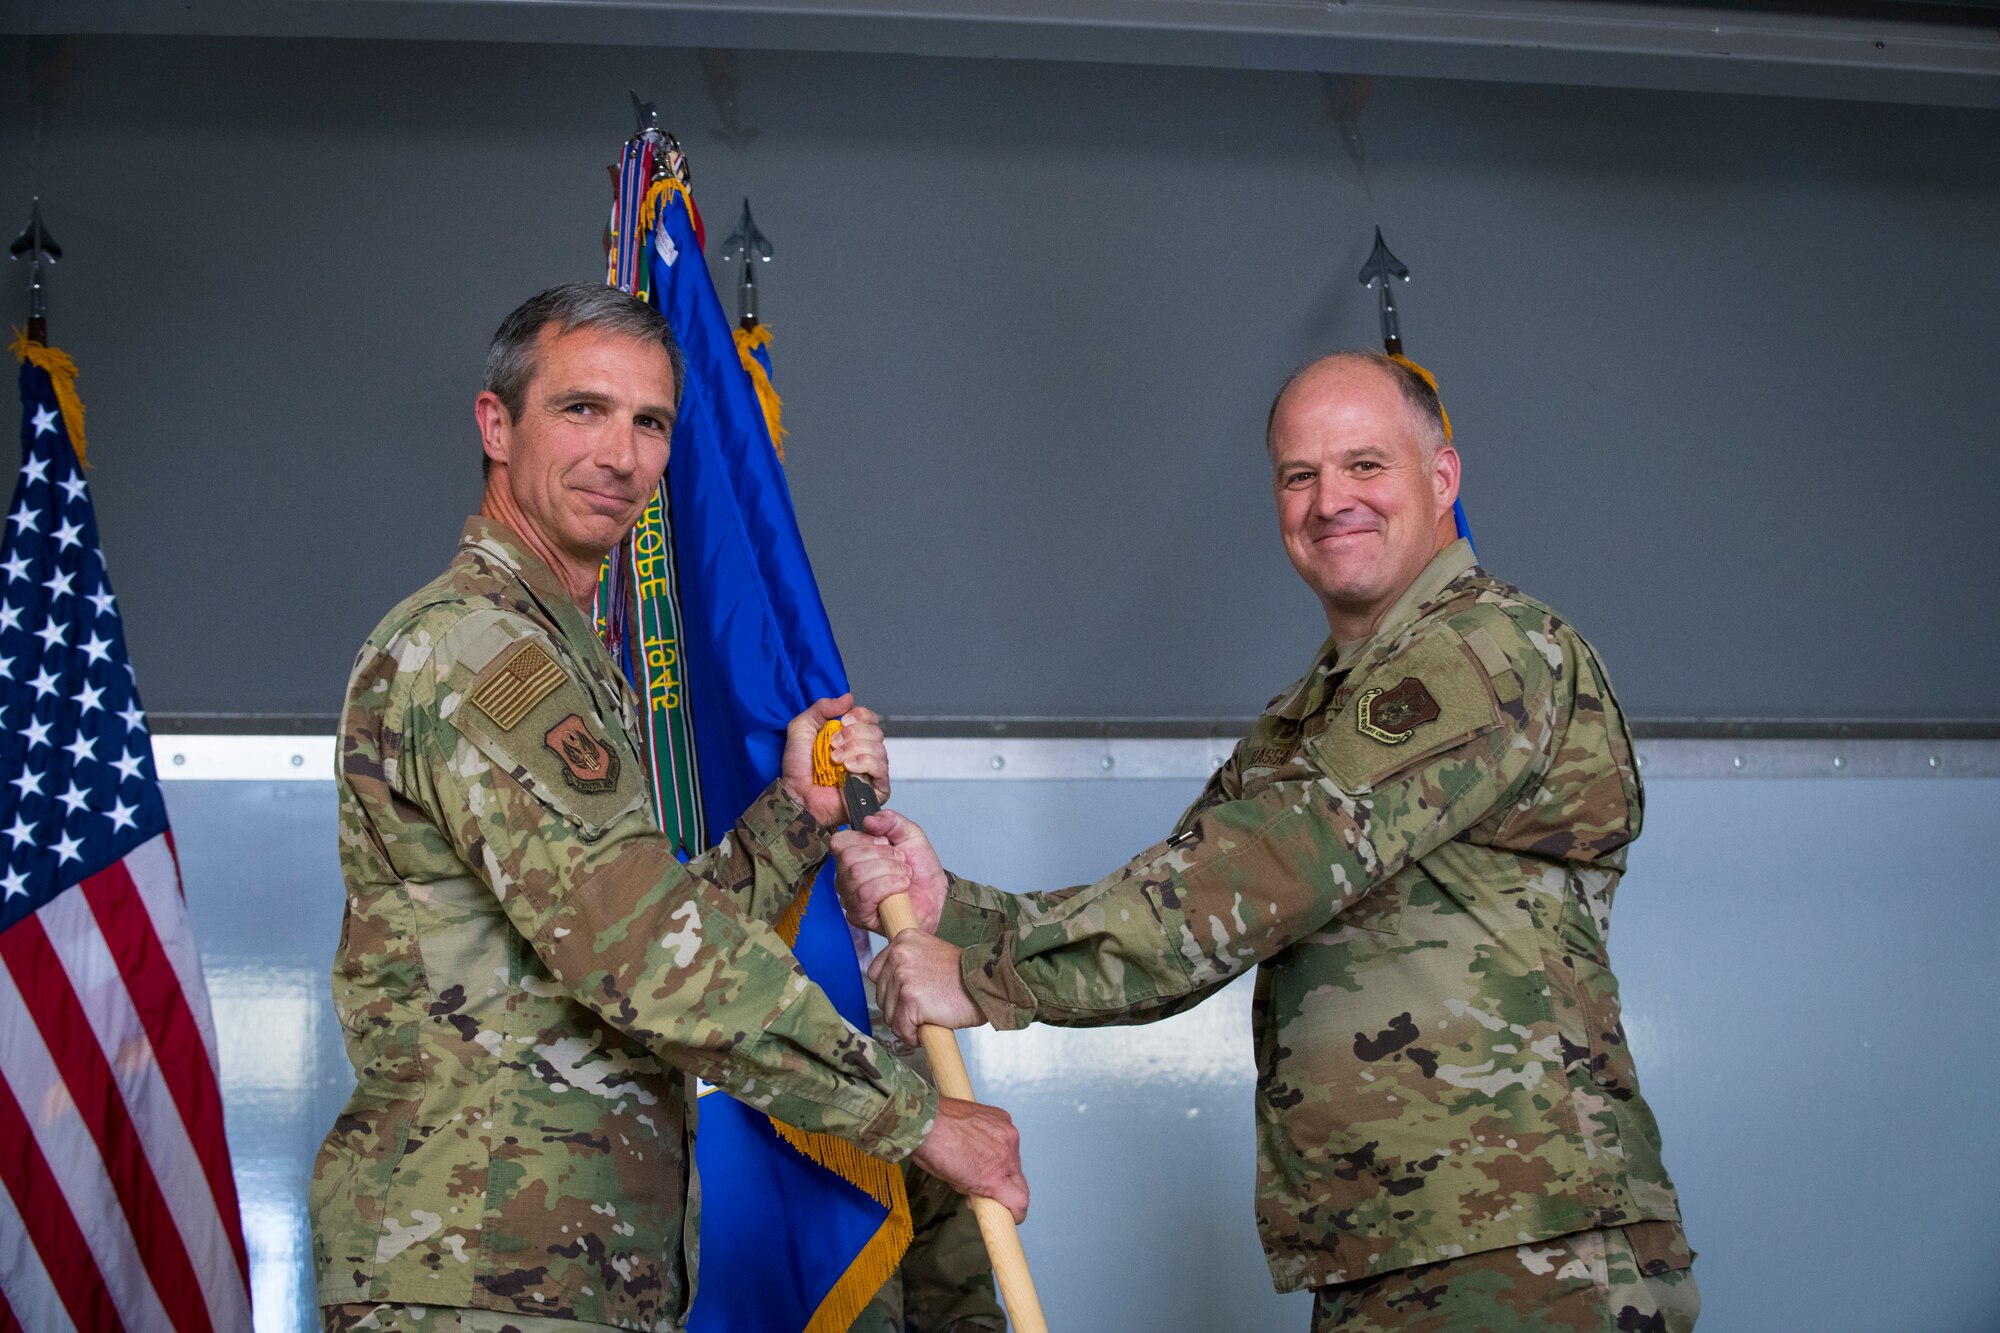 Maj. Gen. Bryan Radliff, 10th Air Force commander, passes the 926th Wing guidon to Col. Sean Rassas, the incoming 926th Wing commander during a change of command ceremony, June 13, 2021, at Nellis Air Force Base, Nevada. Rassis was previously assigned to the 944th Fighter Wing serving as the vice commander. (U.S. Air Force photo by Senior Airman Brett Clashman)